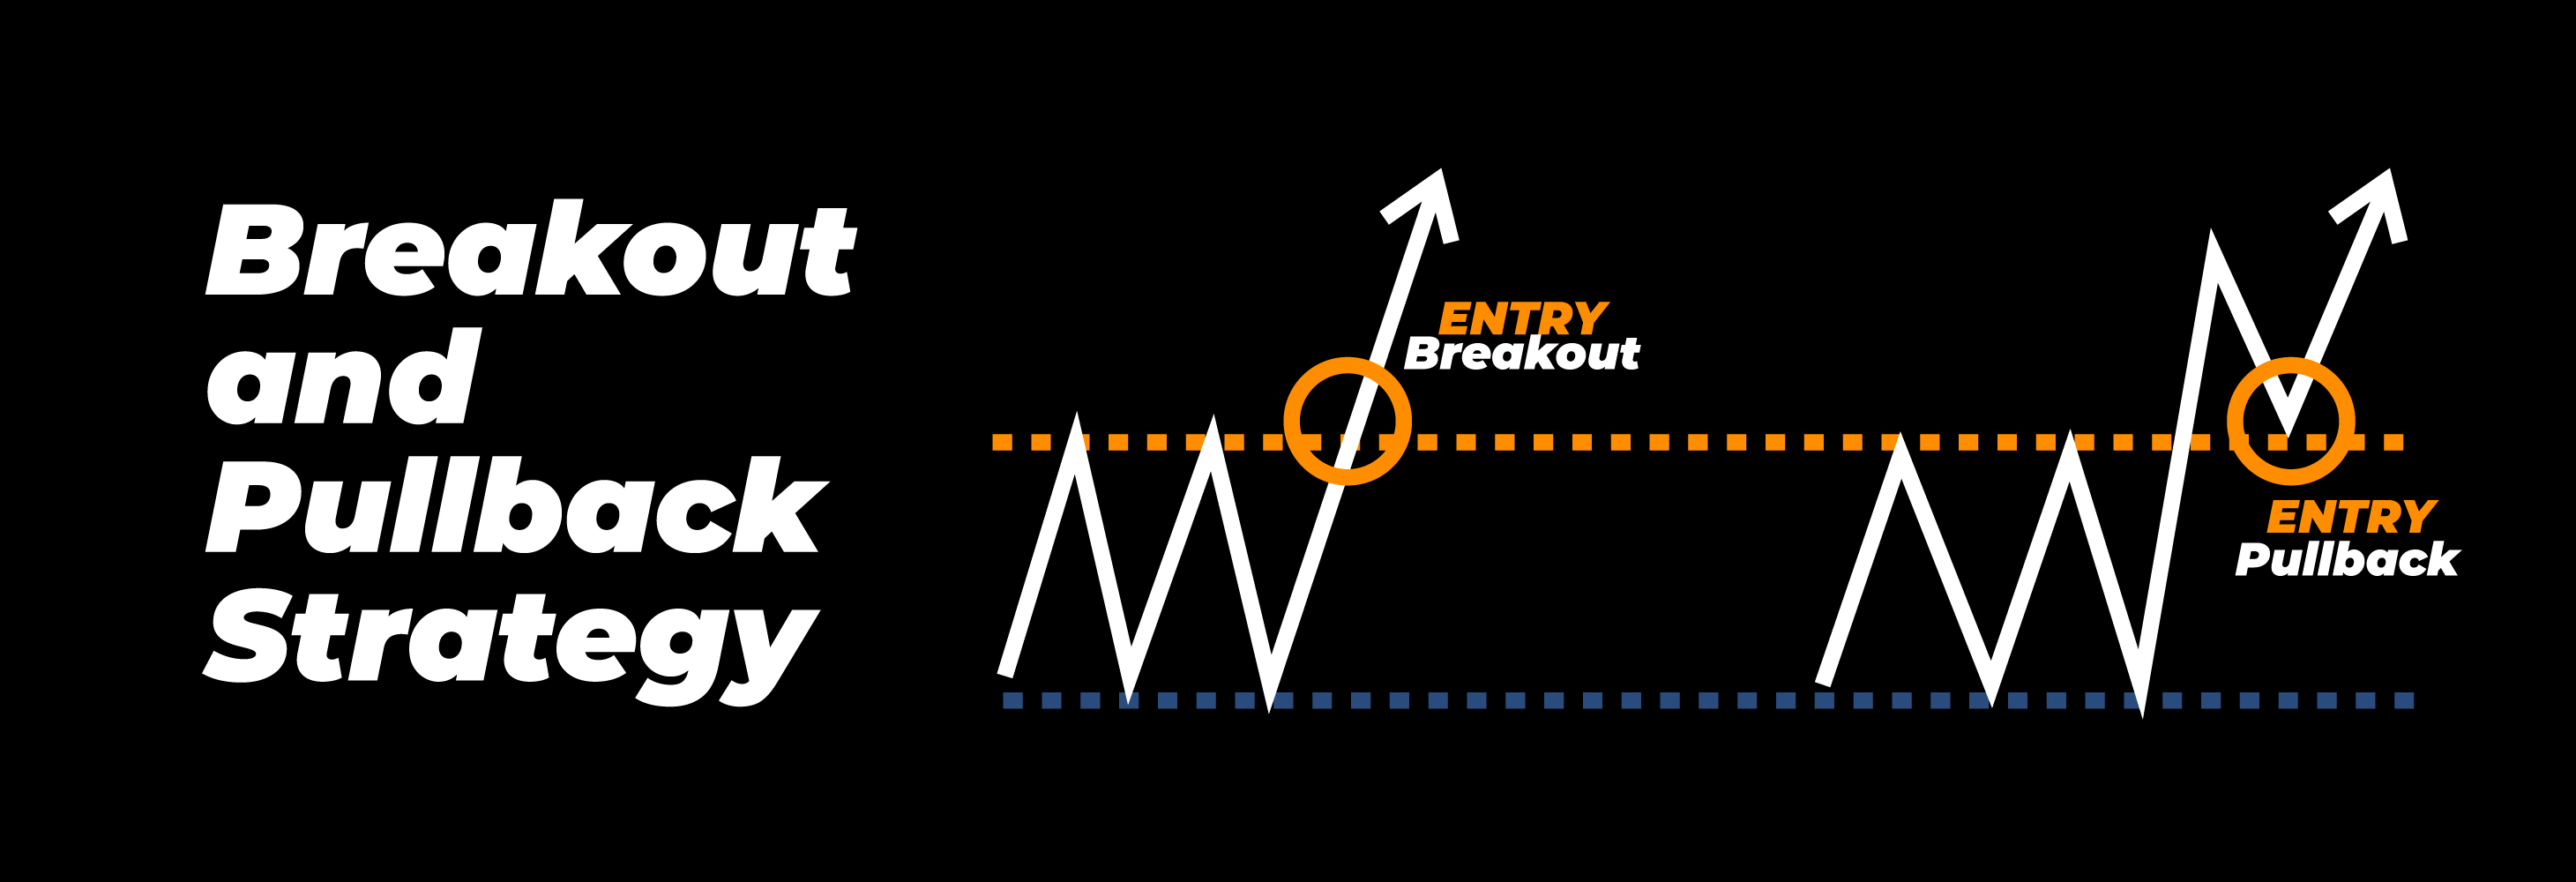 Breakout and Pullback Strategy